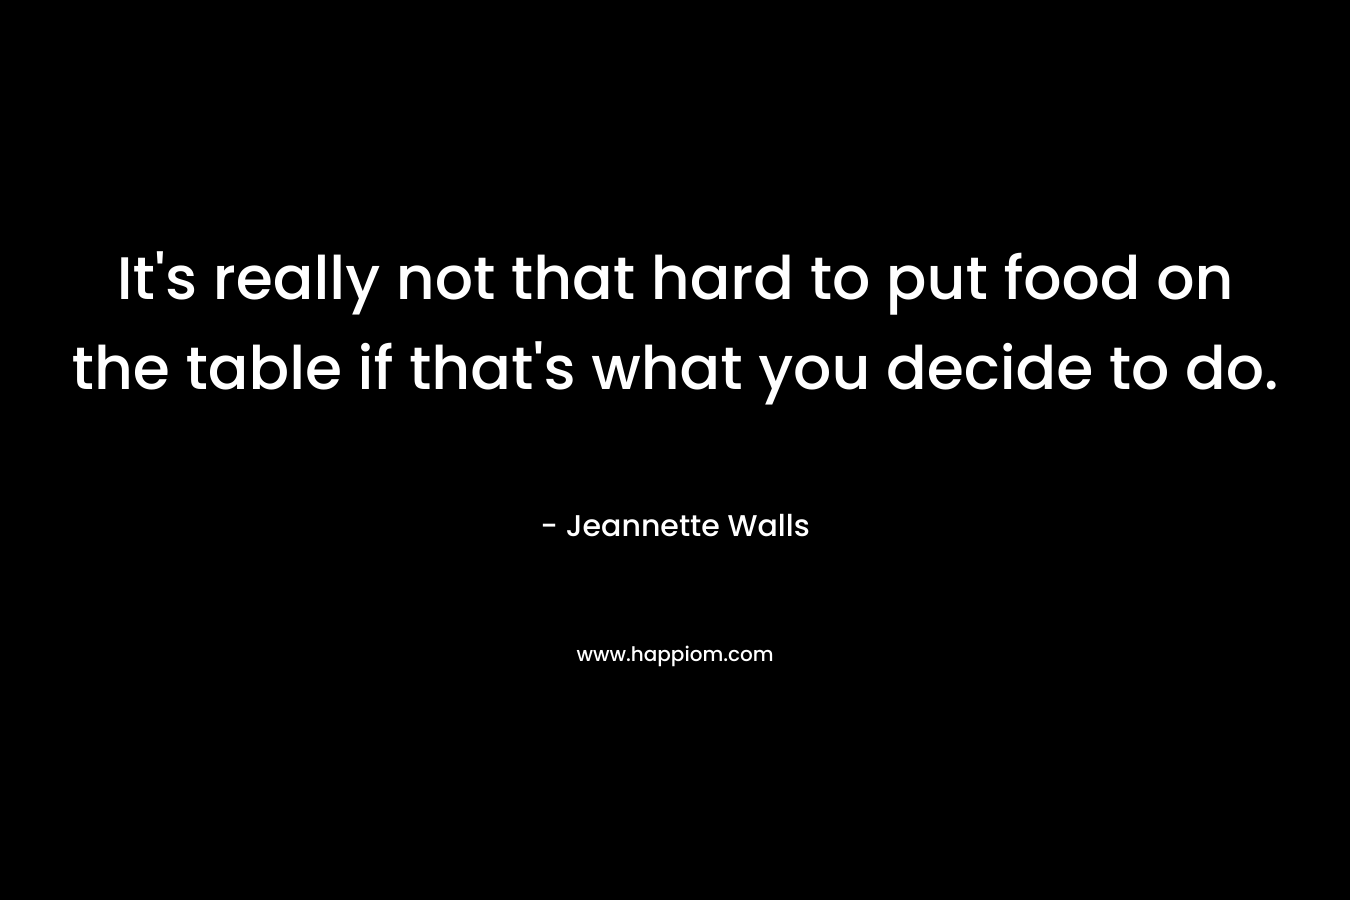 It’s really not that hard to put food on the table if that’s what you decide to do. – Jeannette Walls